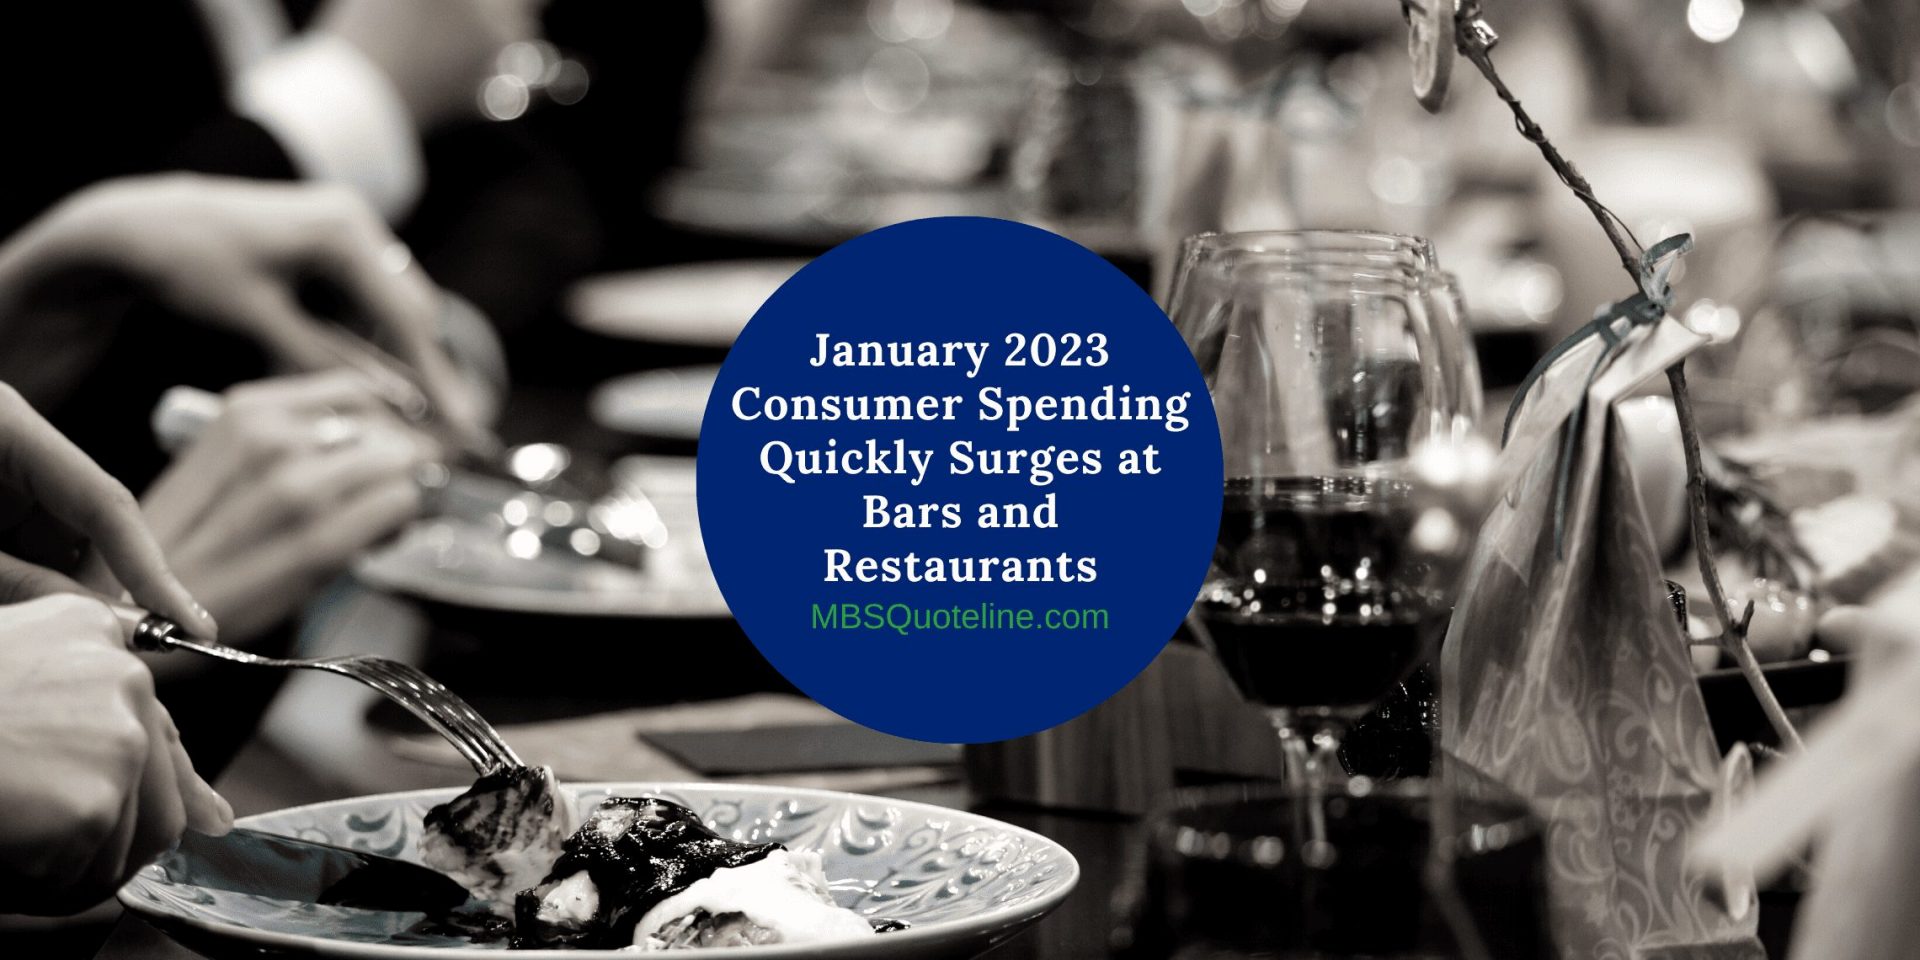 January 2023 Consumer Spending Quickly Surges at Bars and Restaurants Featured MortgageTime MBSQuoteline